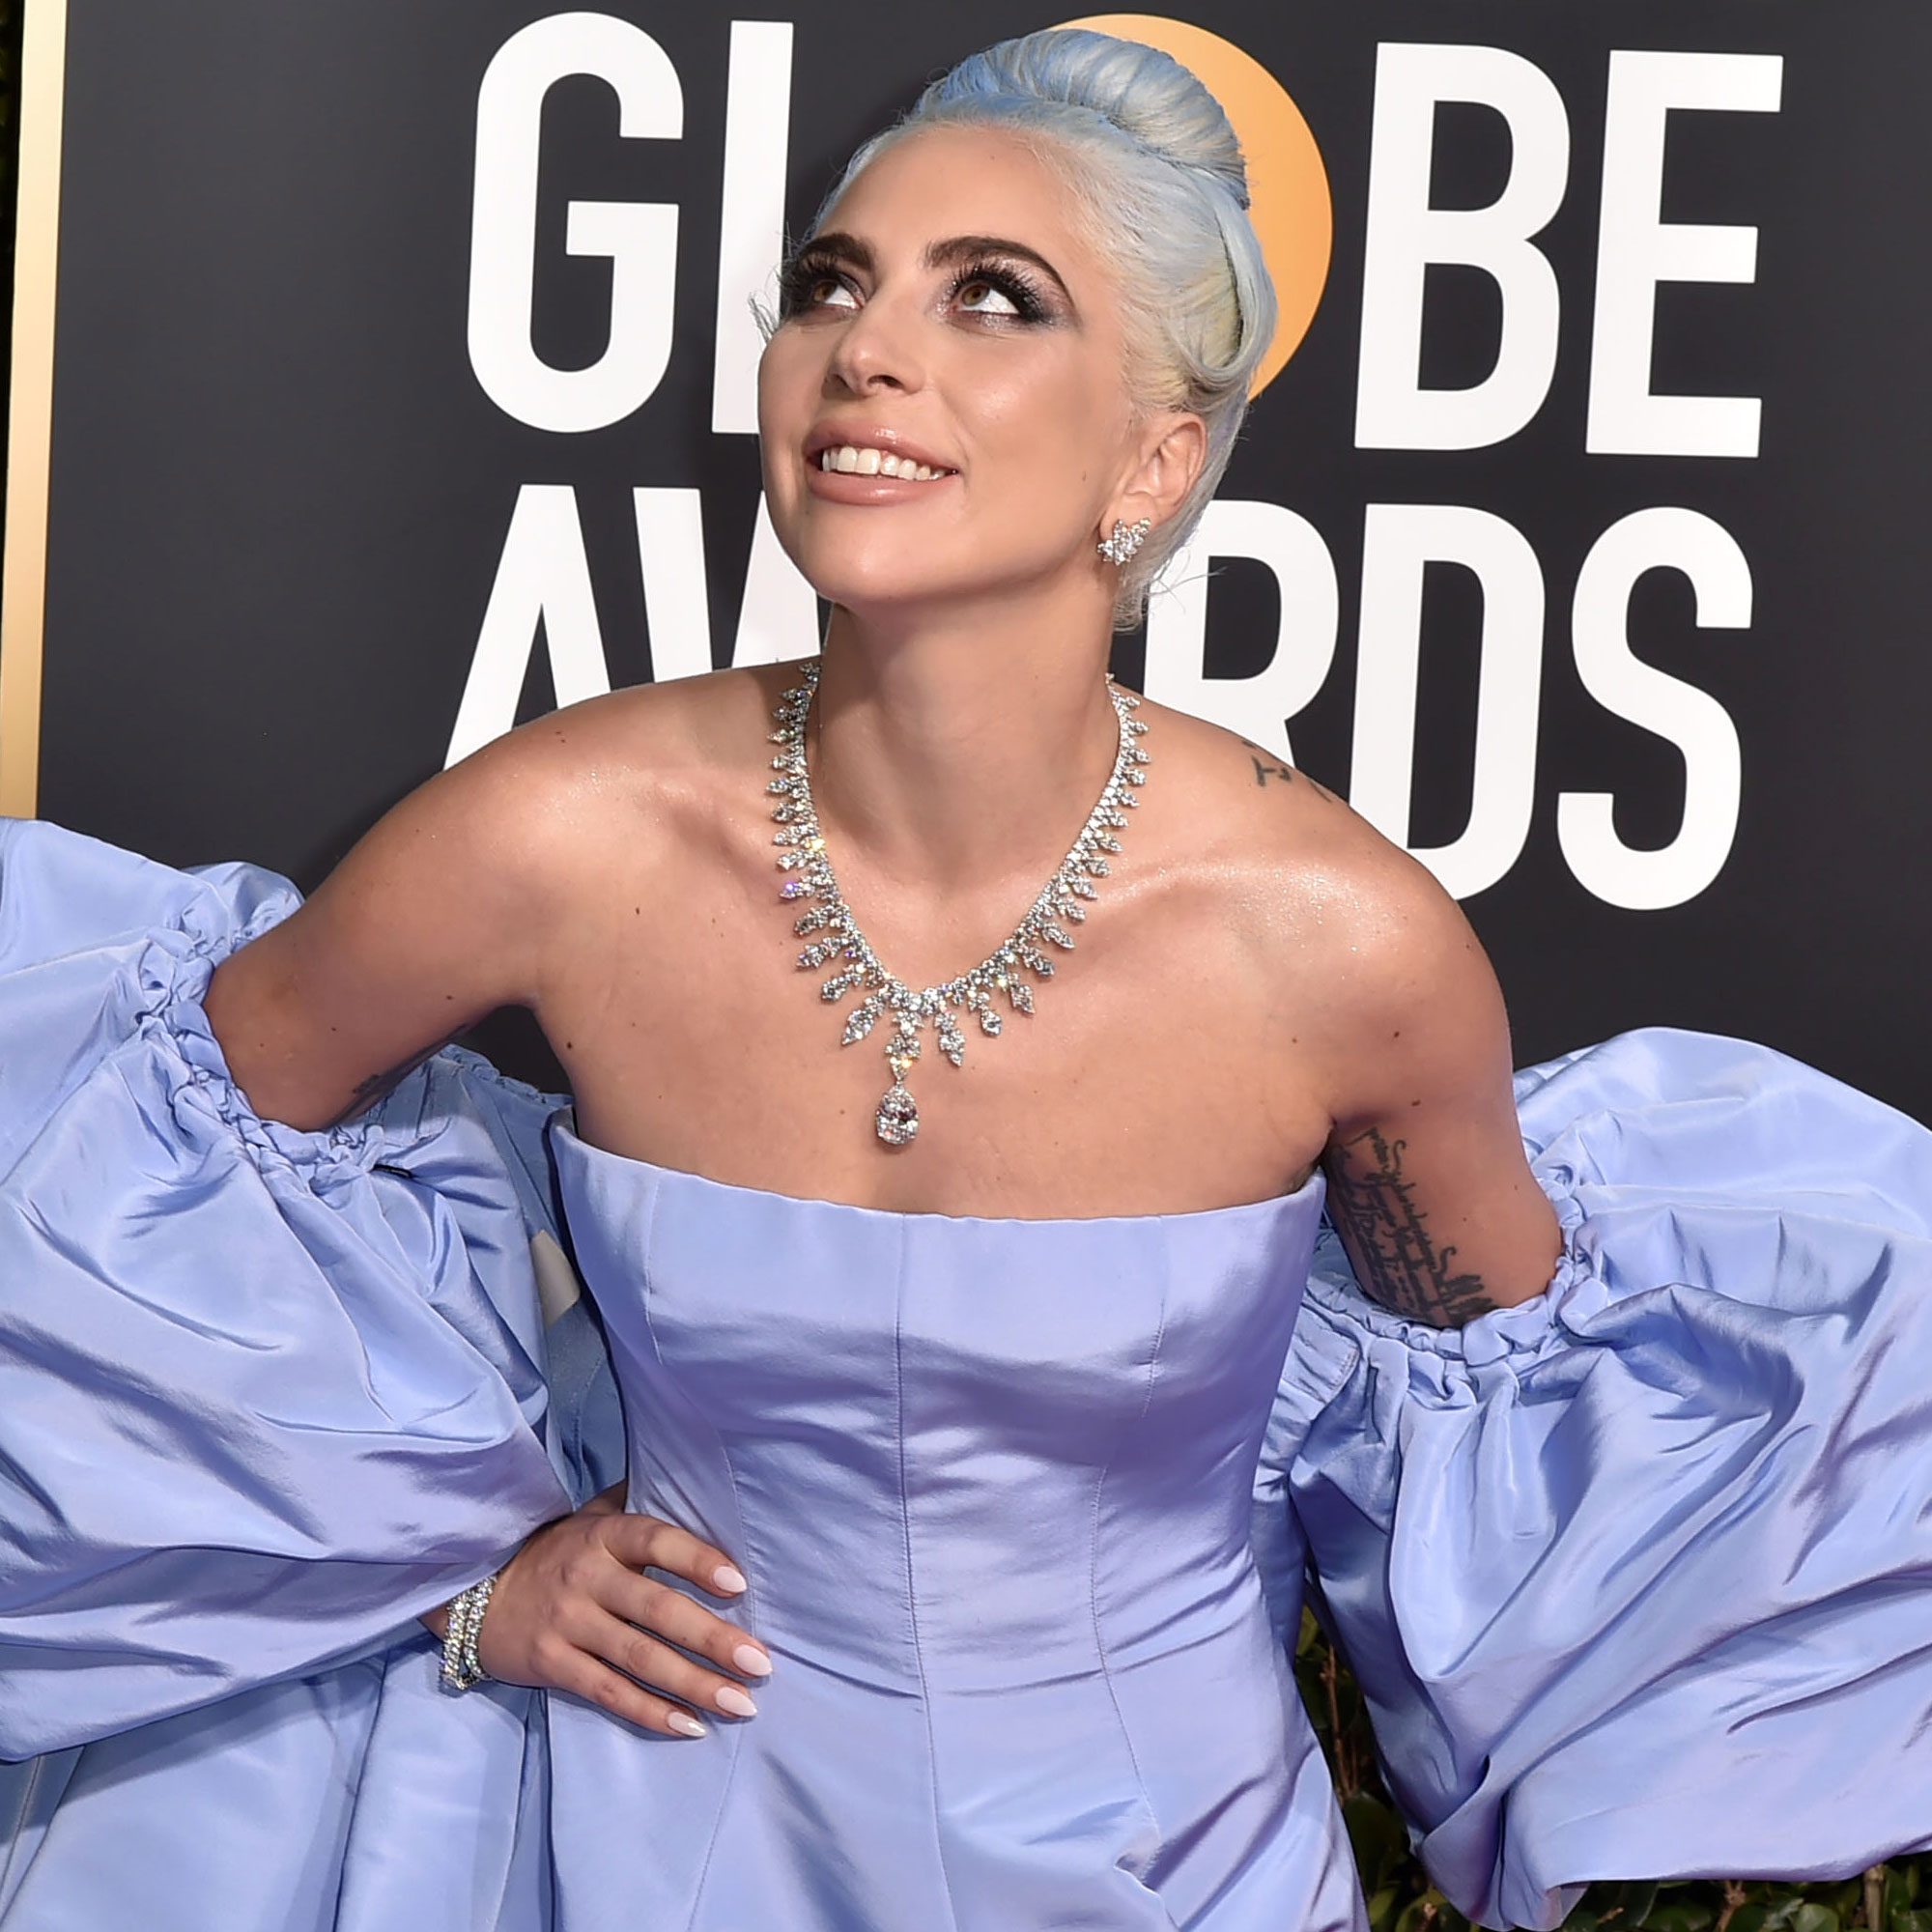 The Jewelry At The 2021 Golden Globes Deserved A Standing Ovation